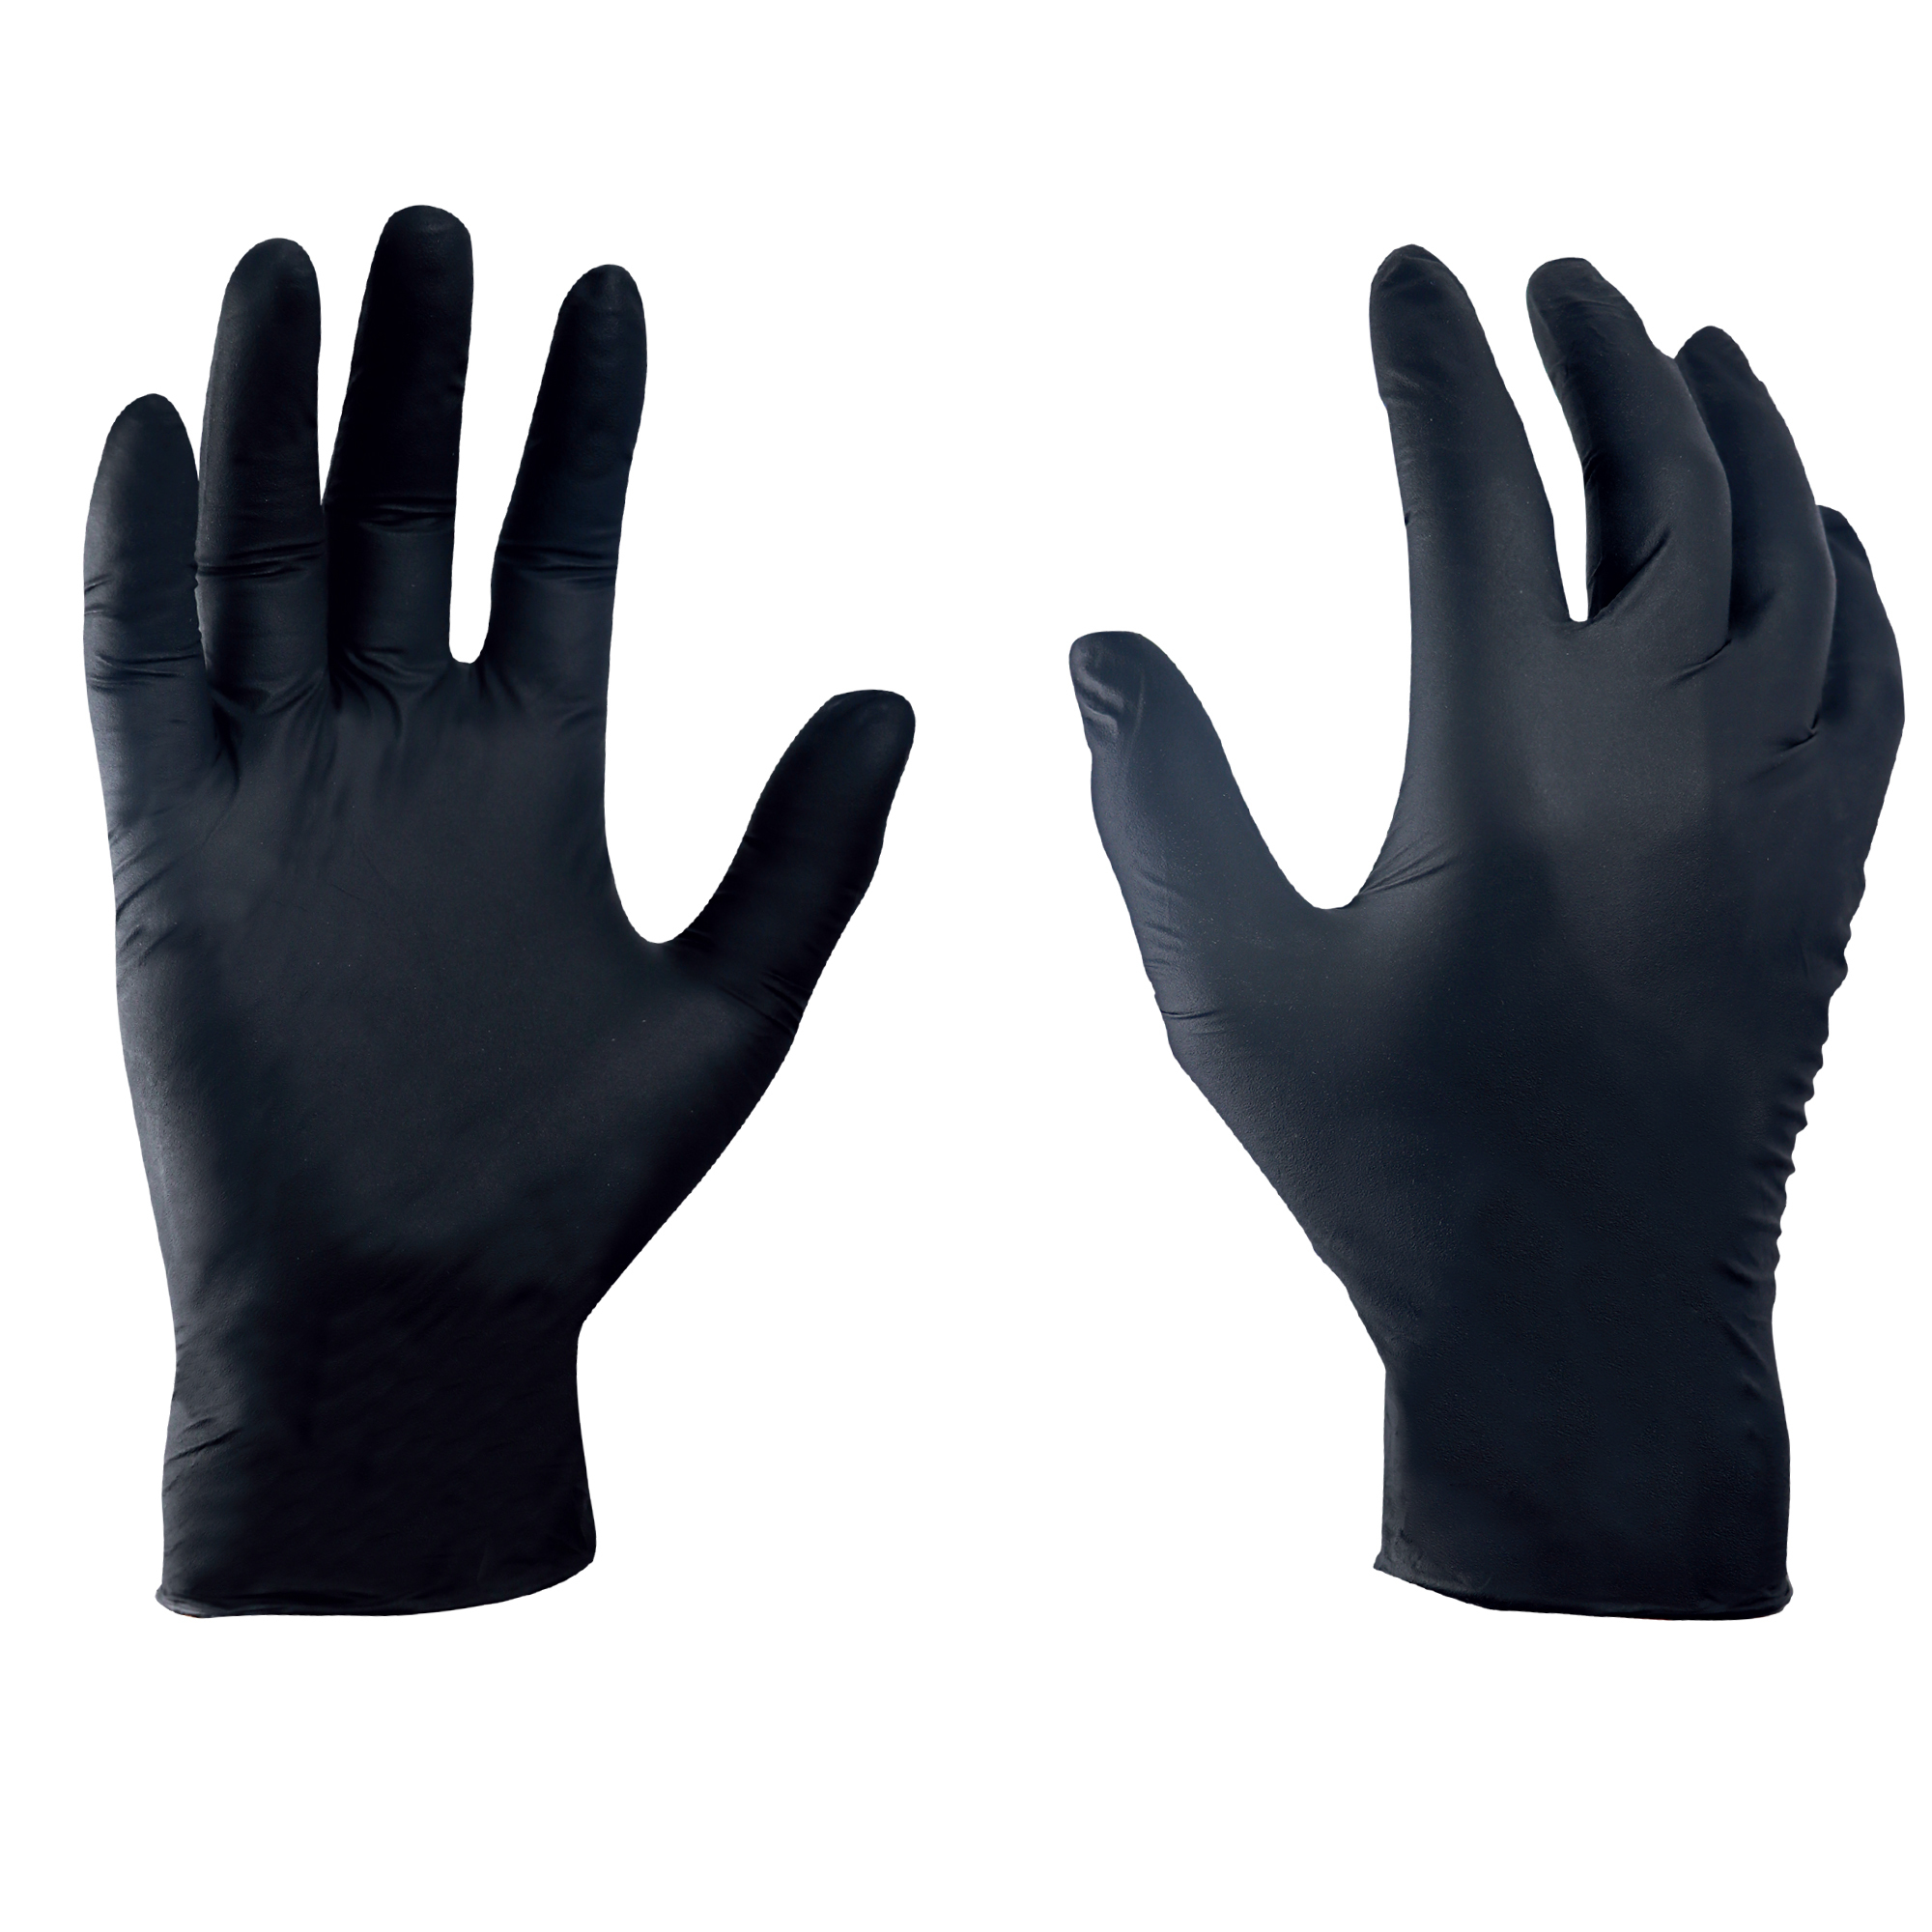 General Electric, 4mil Nitrile Extra large Gloves 100pk, Size XL, Color Black, Included (qty.) 100 Model GG601XL